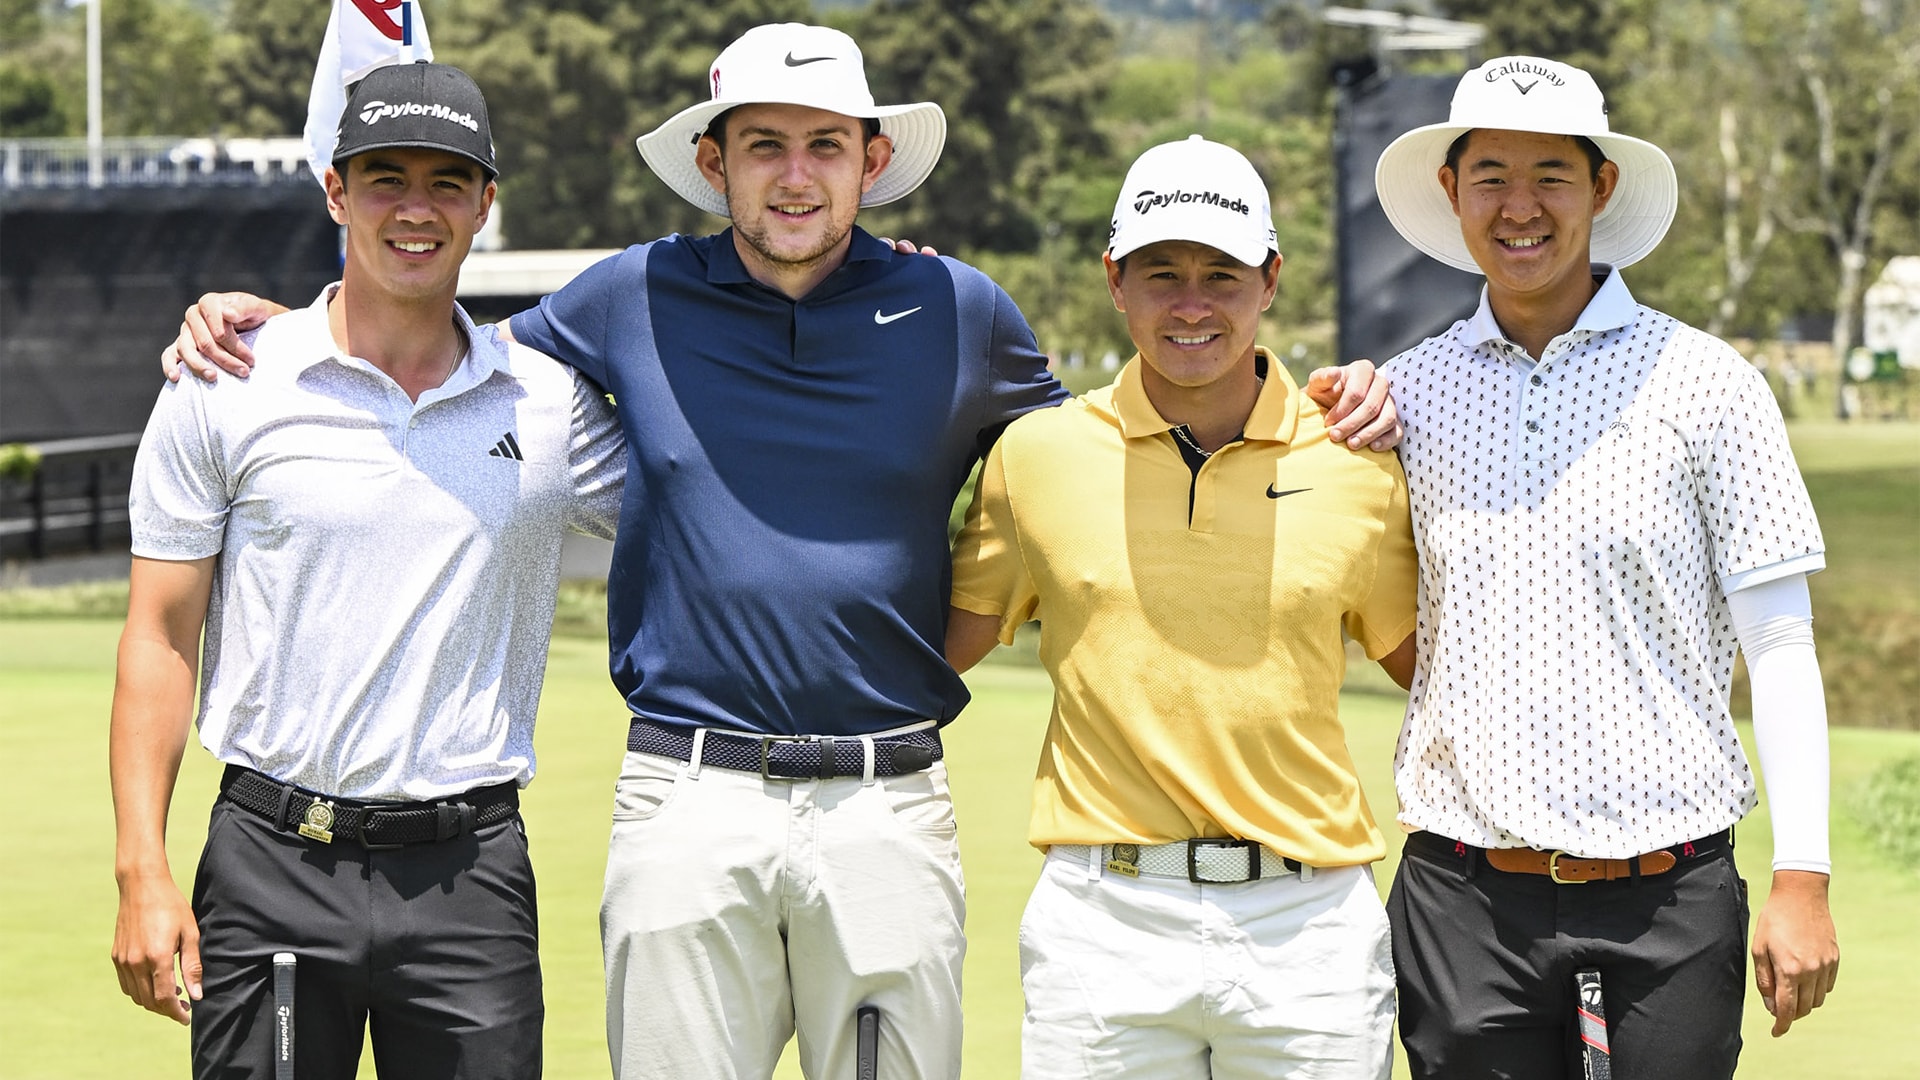 Stanford foursome relishes major first at 2023 U.S. Open